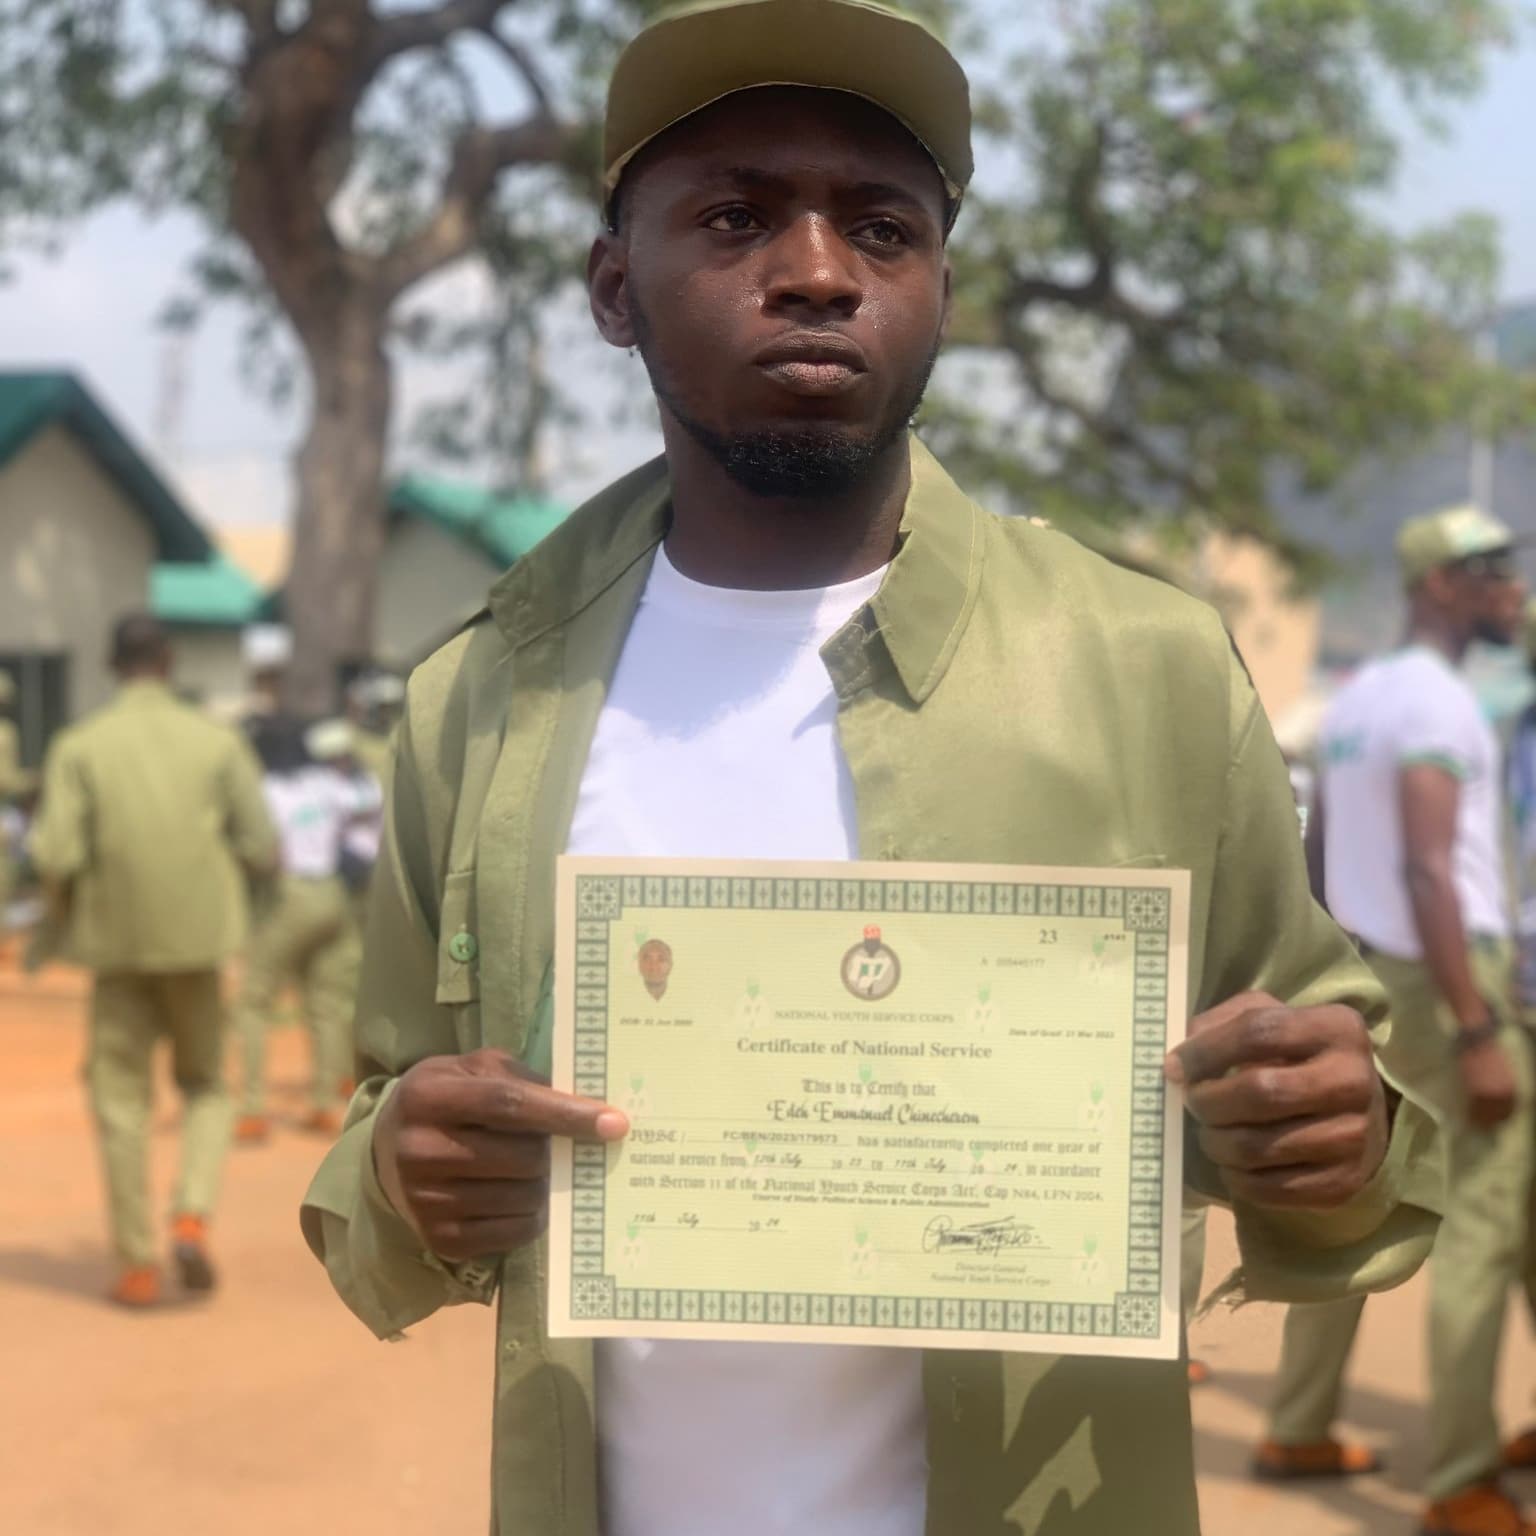 Nigerian man goes viral as he breaks jinx, becomes first graduate in his family